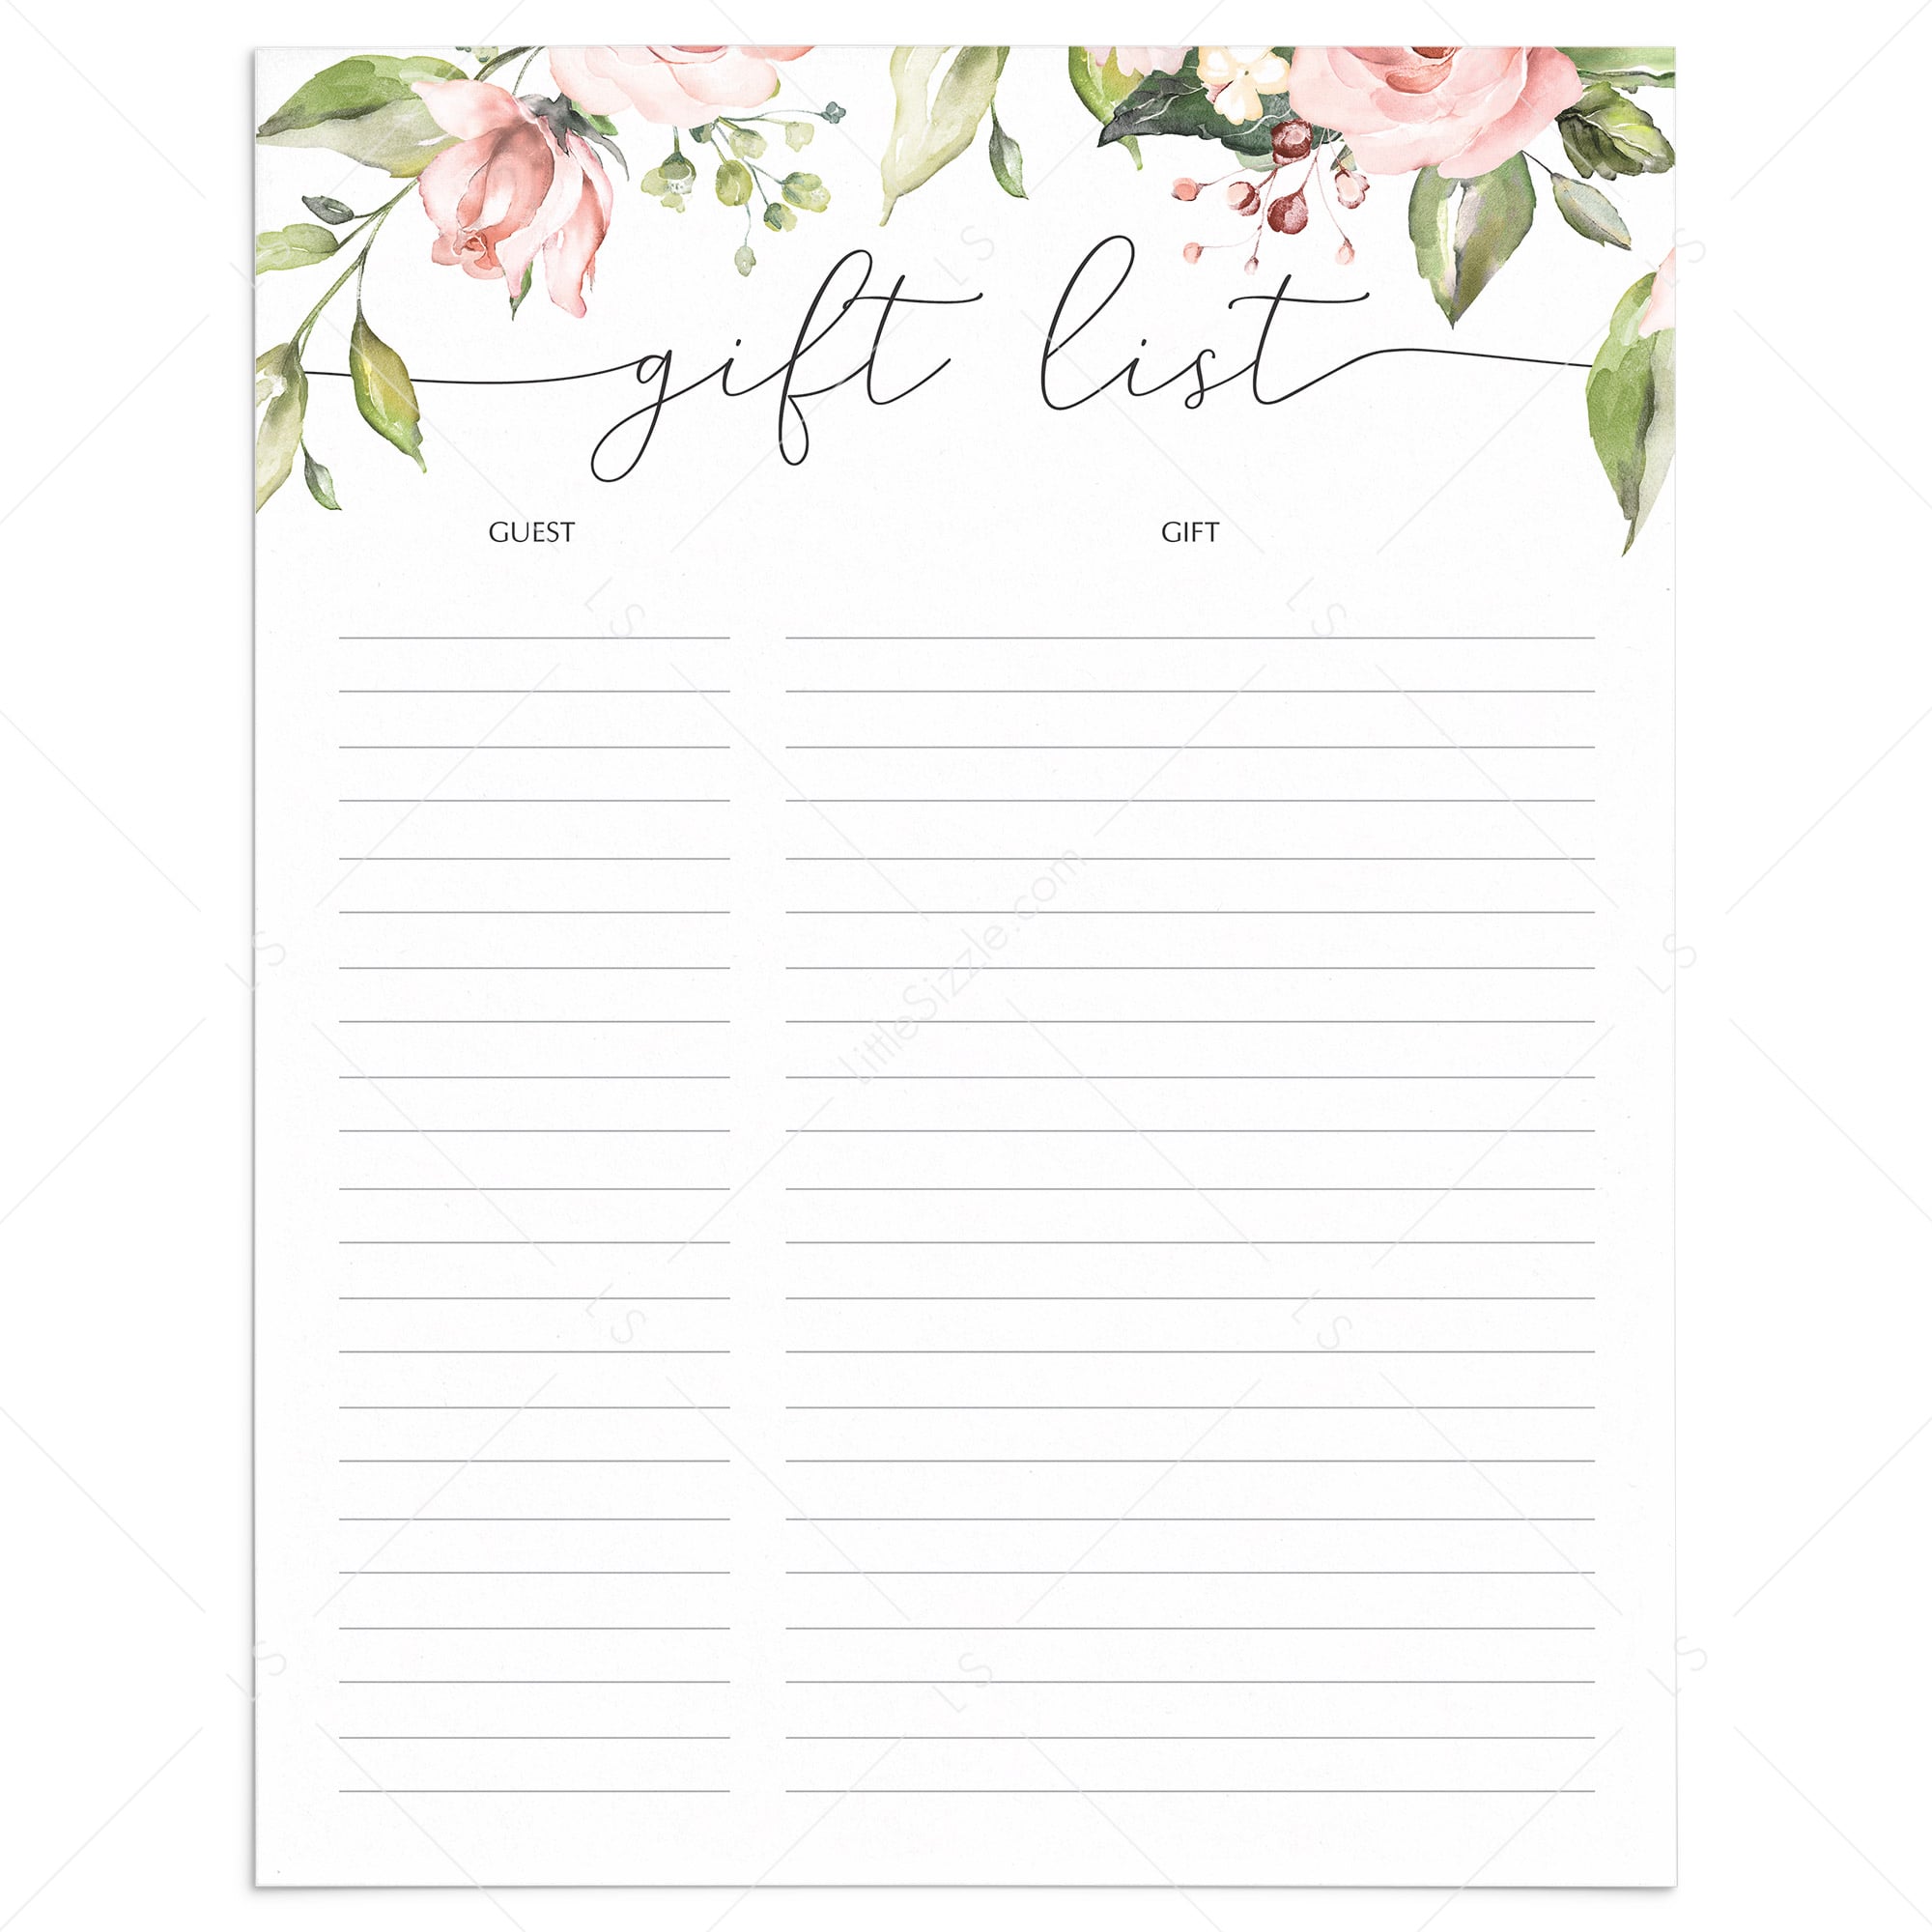 Printable gift list planner sheets watercolor flowers by LittleSizzle